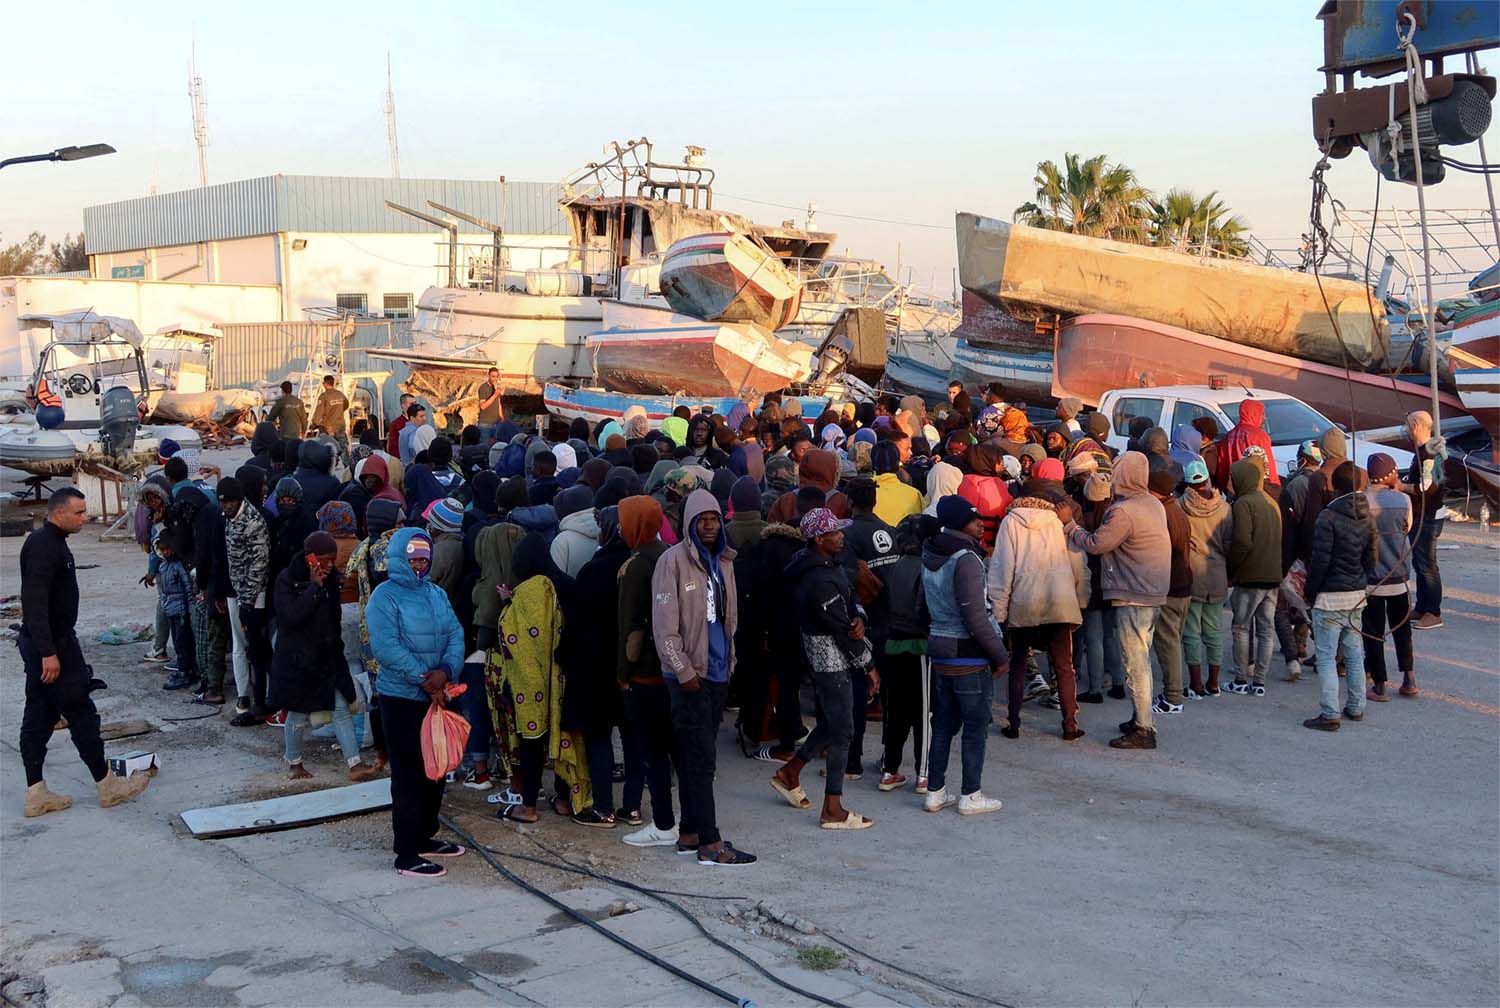 Sfax is crowded with thousands of African migrants aiming to set off to Europe on boats